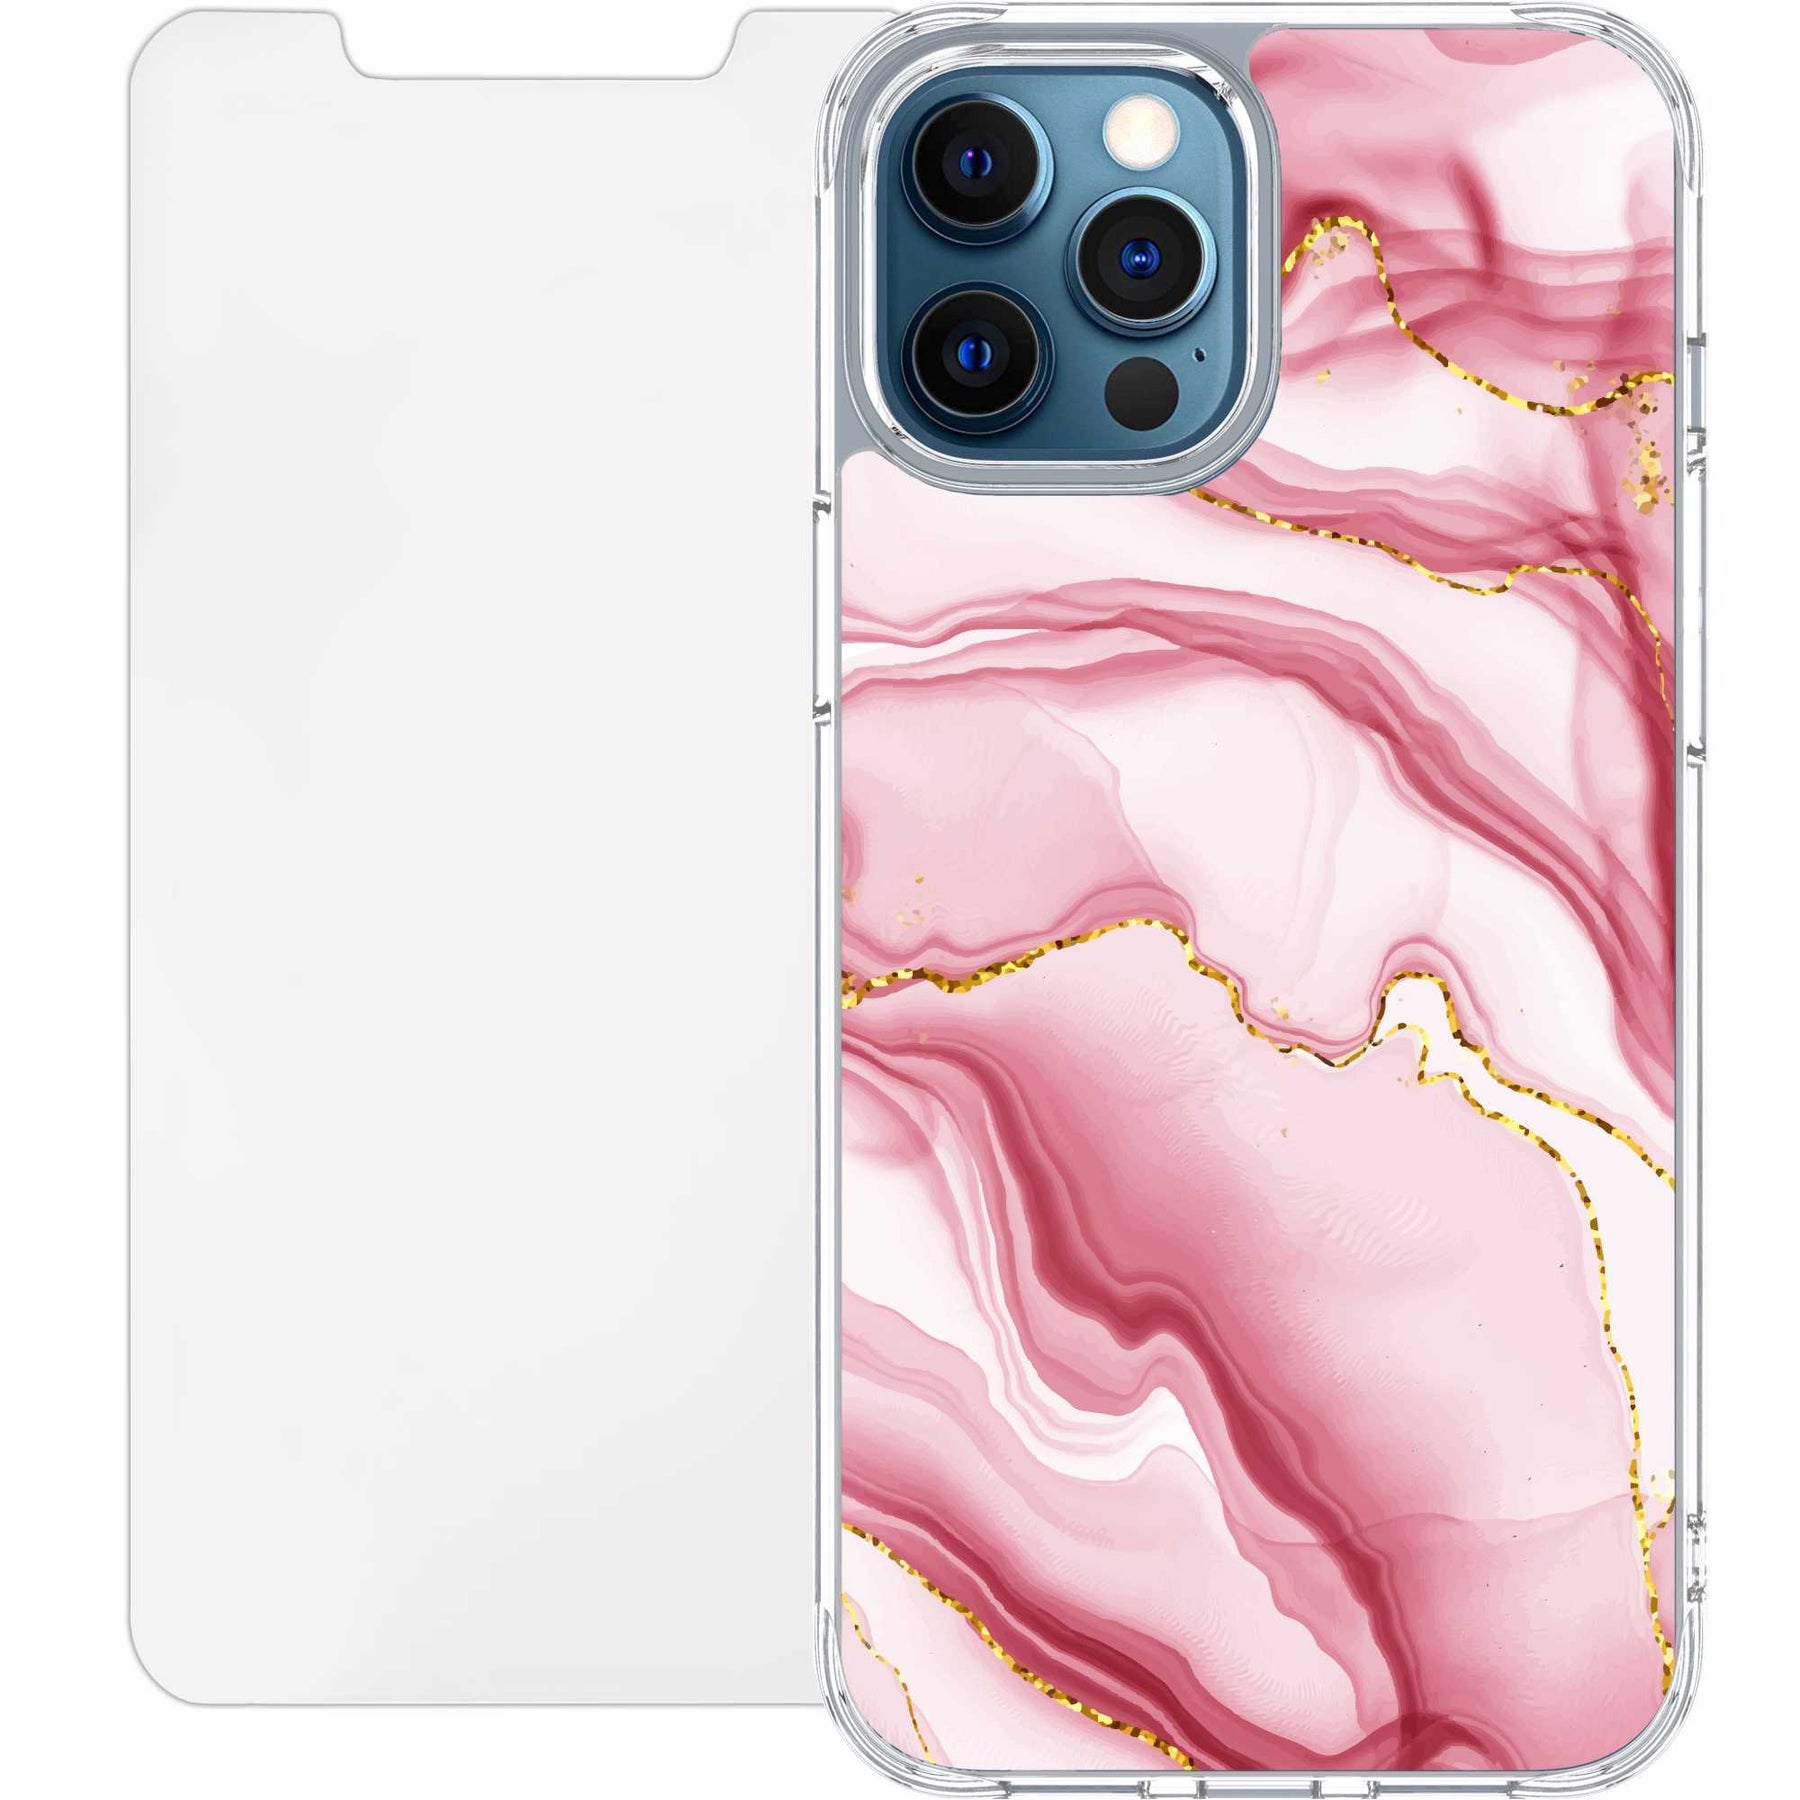 Scooch MagCase for iPhone 12 Pro BlushMarble Scooch MagCase